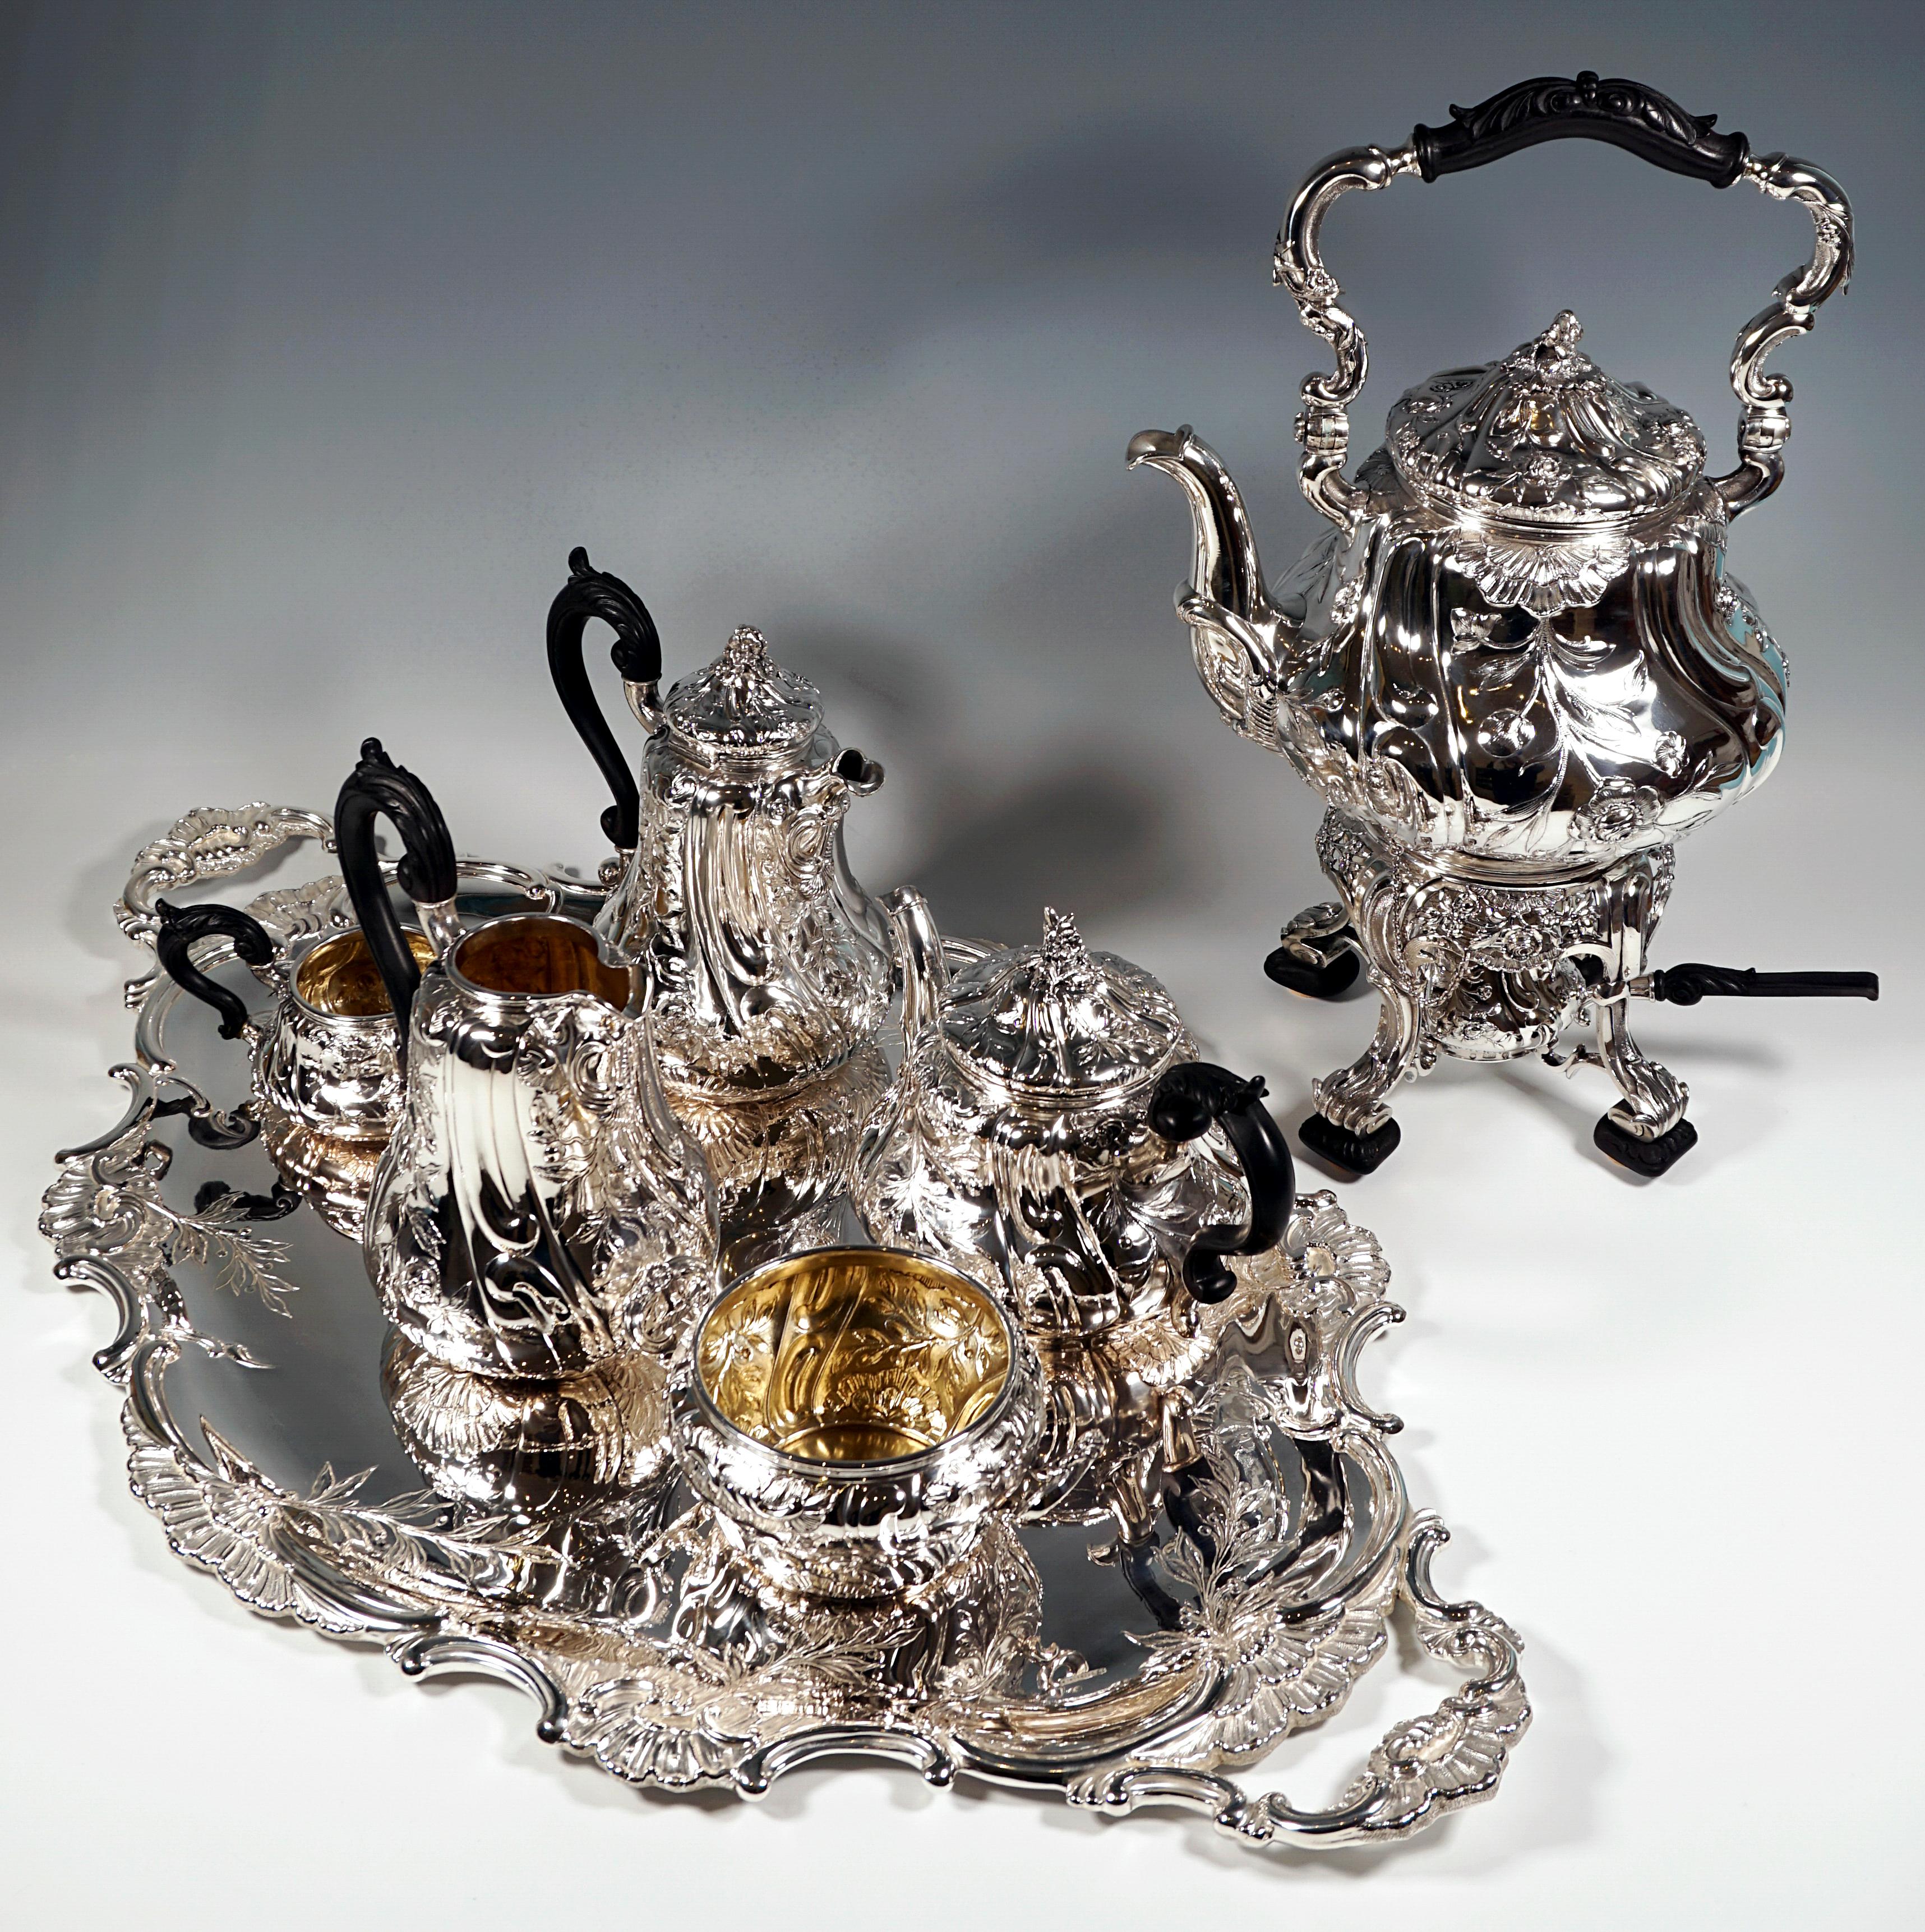 Excellent, complete silver coffee and tea set consisting of 8 pieces, pear-shaped pots, walls richly decorated with floral Art Nouveau motifs - leafy tendrils with berries and flowers, as well as volutes and rocailles covering the entire surface,